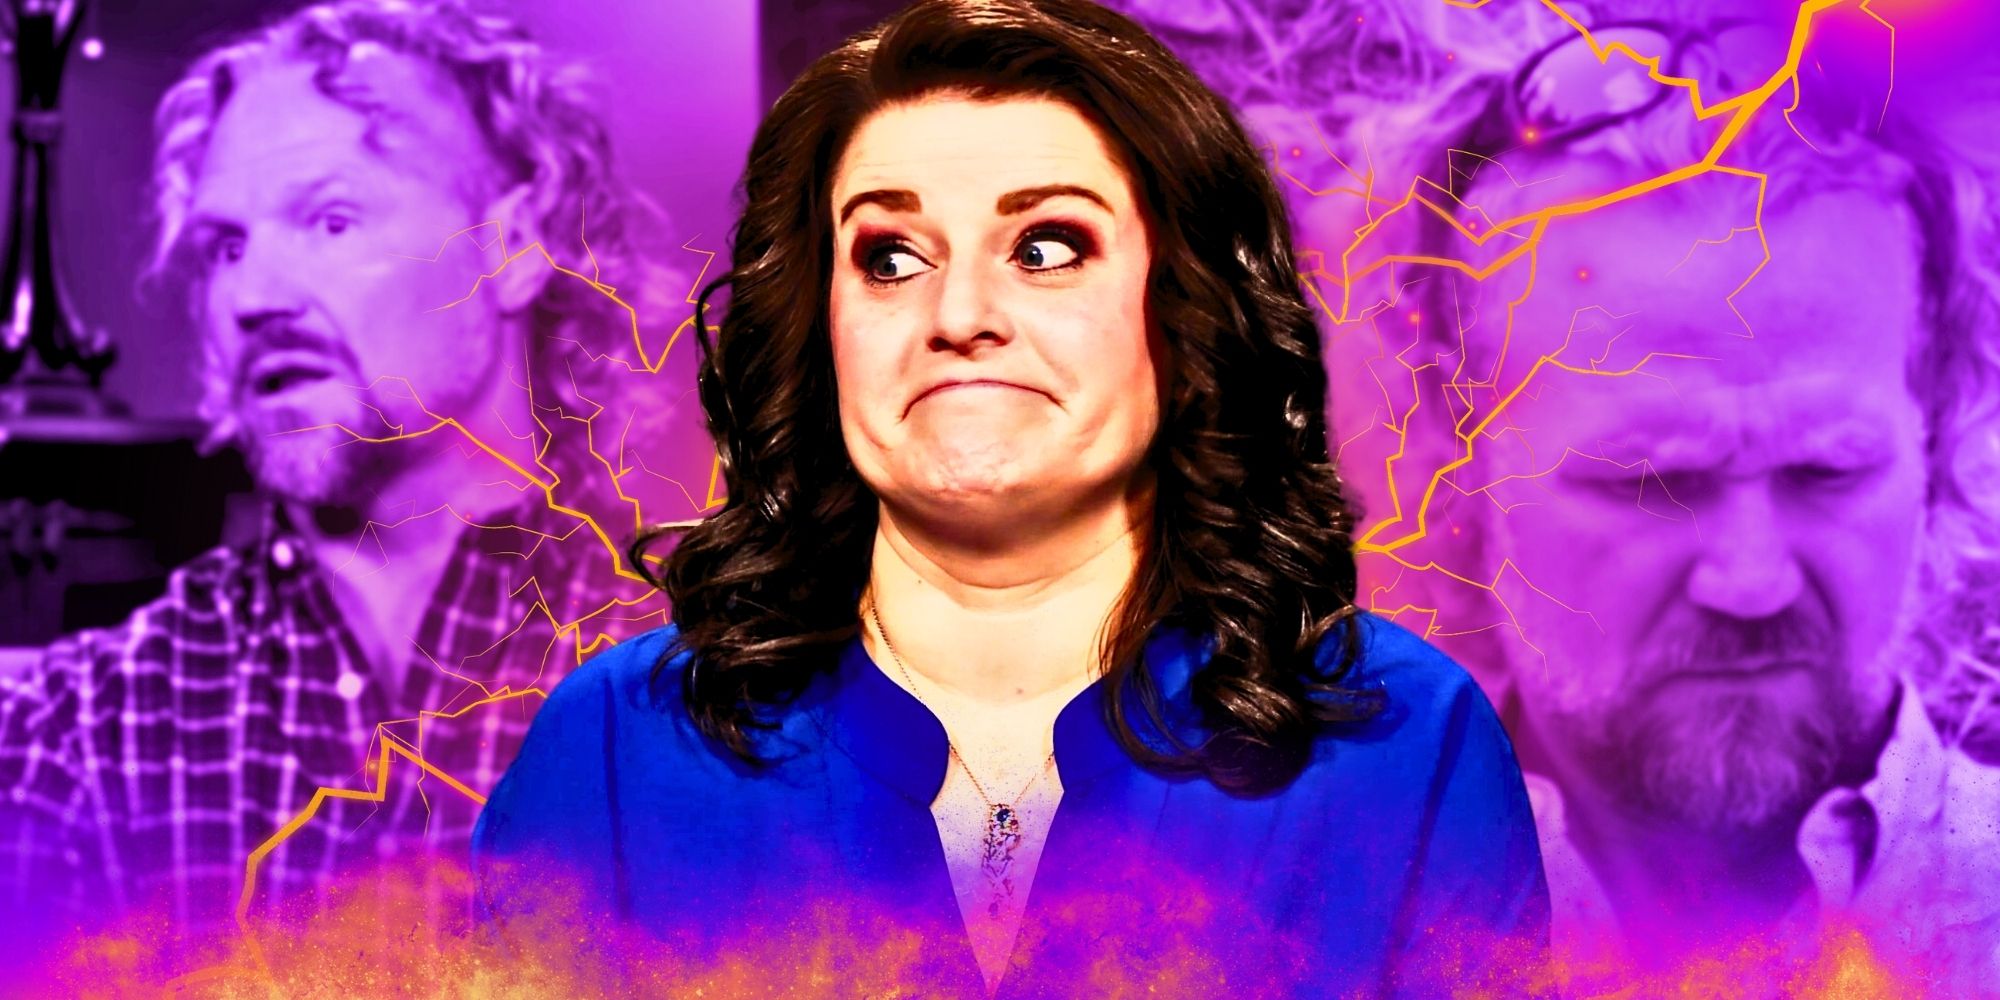 Sister Wives robyn kody robyn brown making a face lavender background